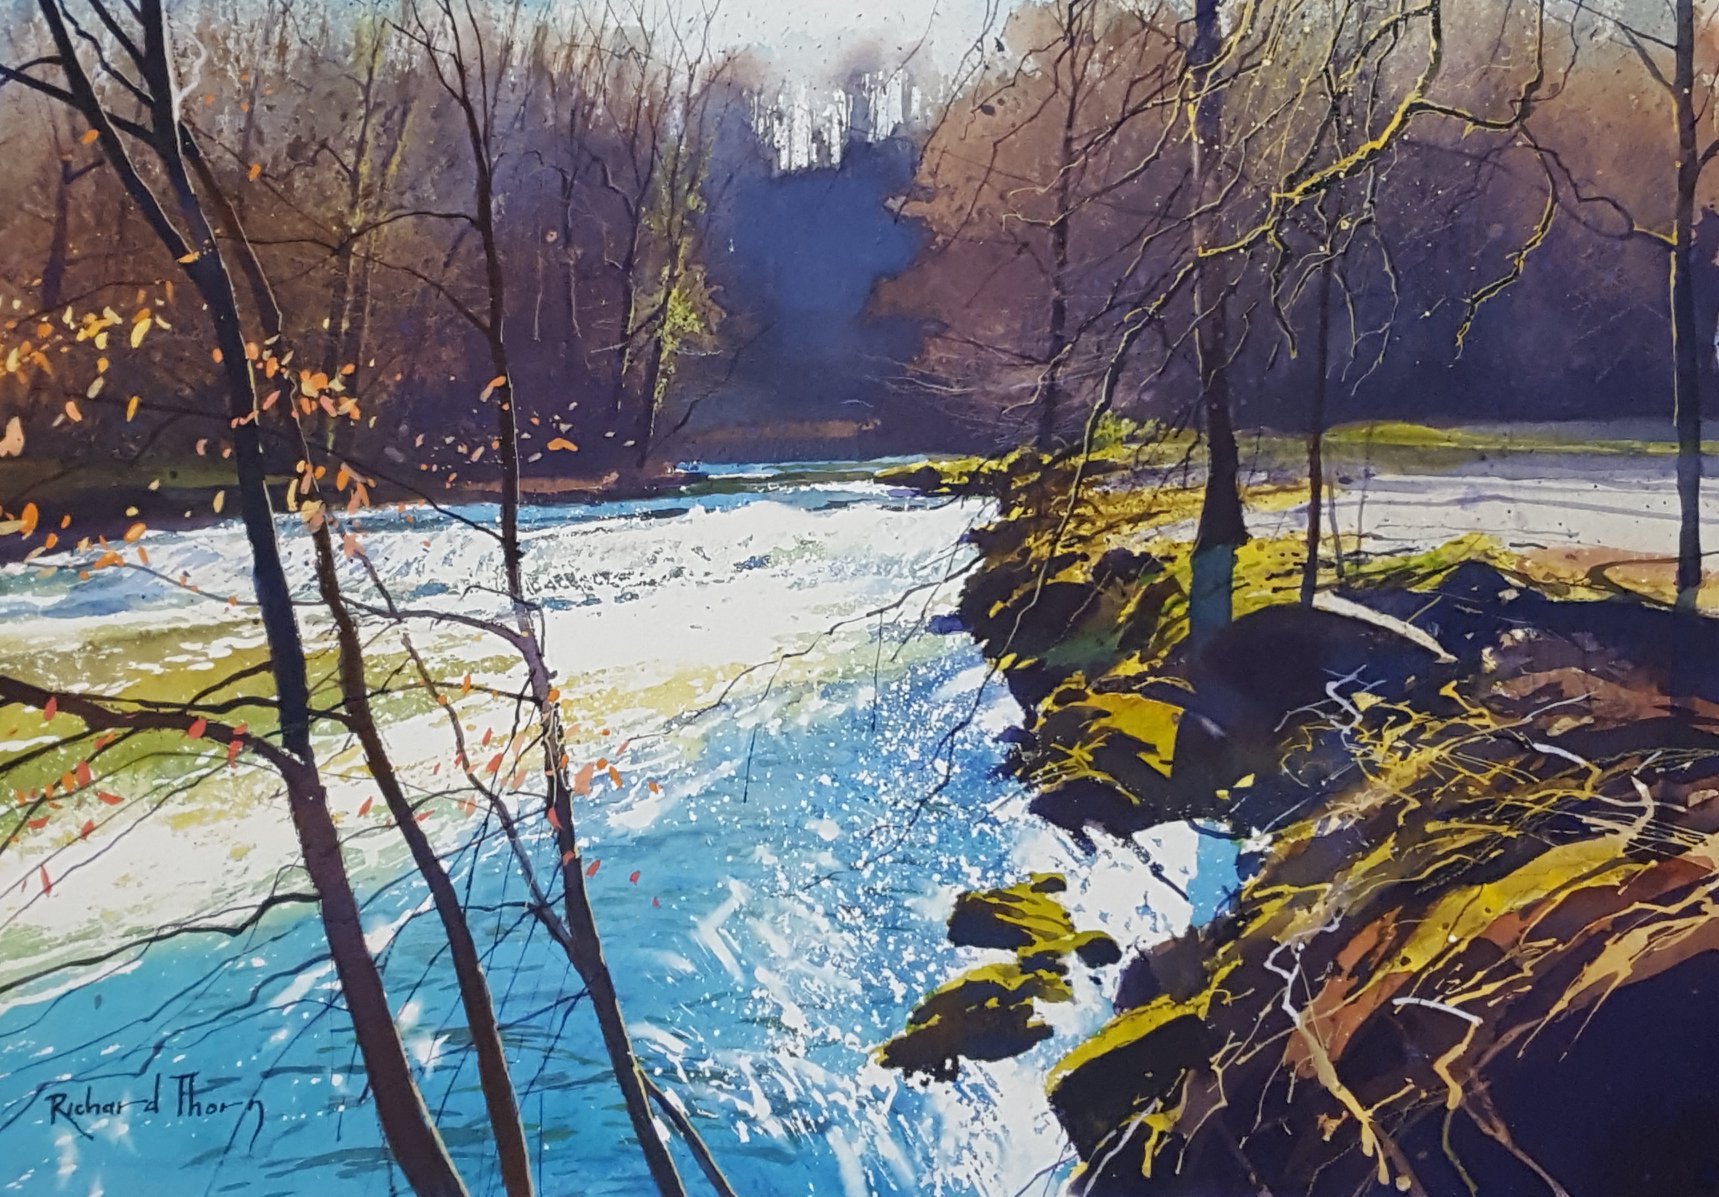 The weir on the River Bovey - Richard Thorn